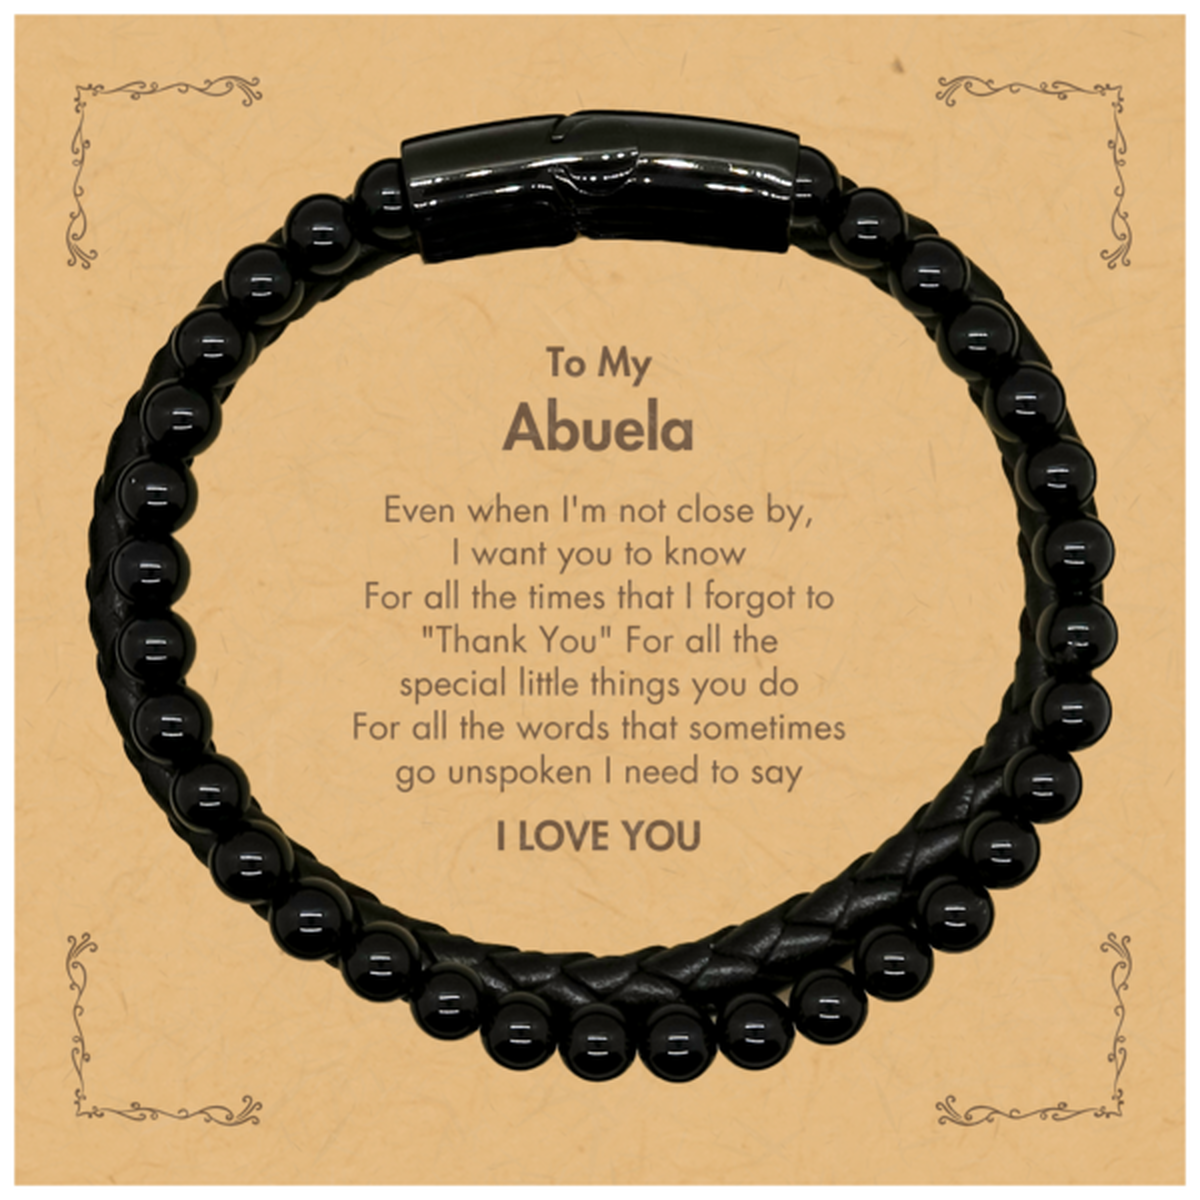 Thank You Gifts for Abuela, Keepsake Stone Leather Bracelets Gifts for Abuela Birthday Mother's day Father's Day Abuela For all the words That sometimes go unspoken I need to say I LOVE YOU